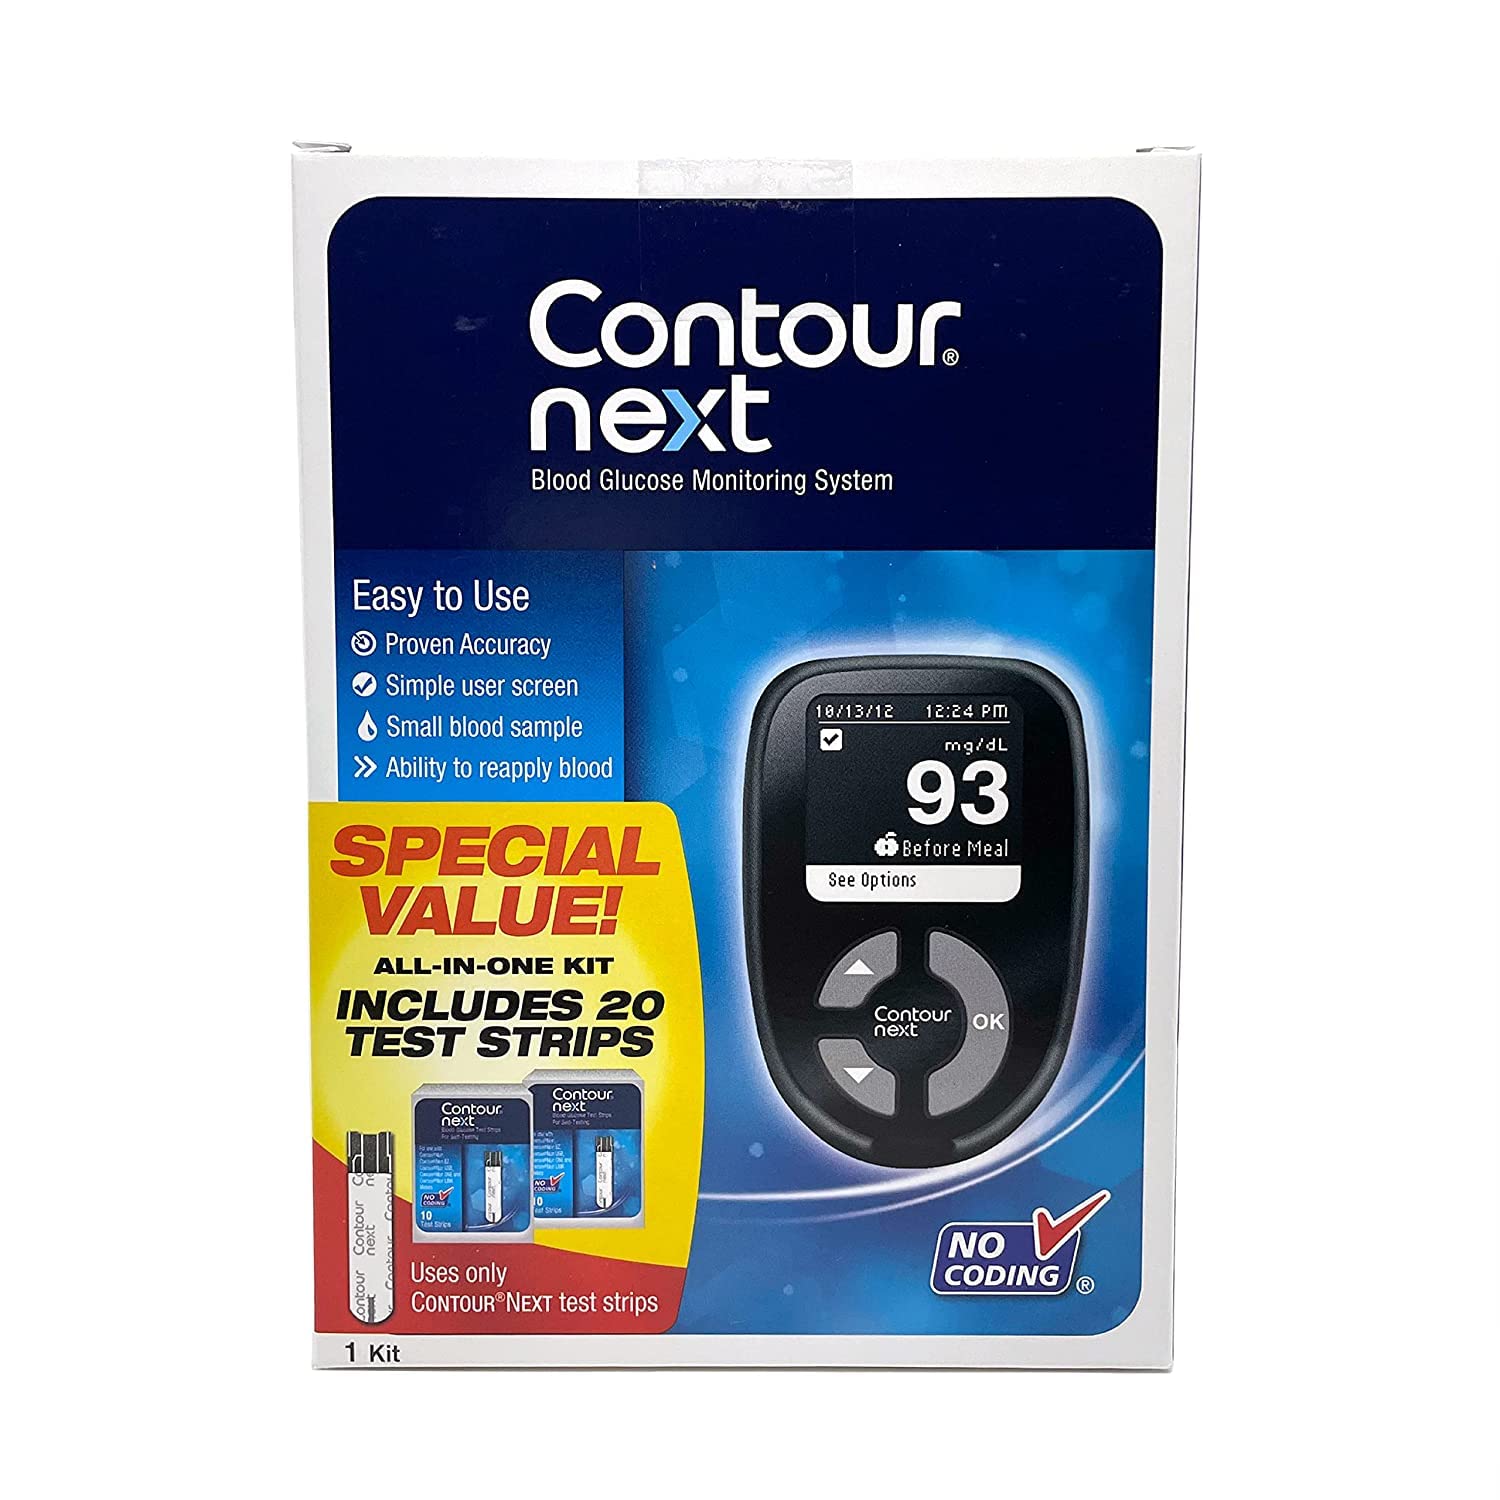 The Contour Next Blood Glucose Monitoring System All-in-One Kit for Diabetes & CONTOUR NEXT Blood Glucose Test Strips, 70 Count